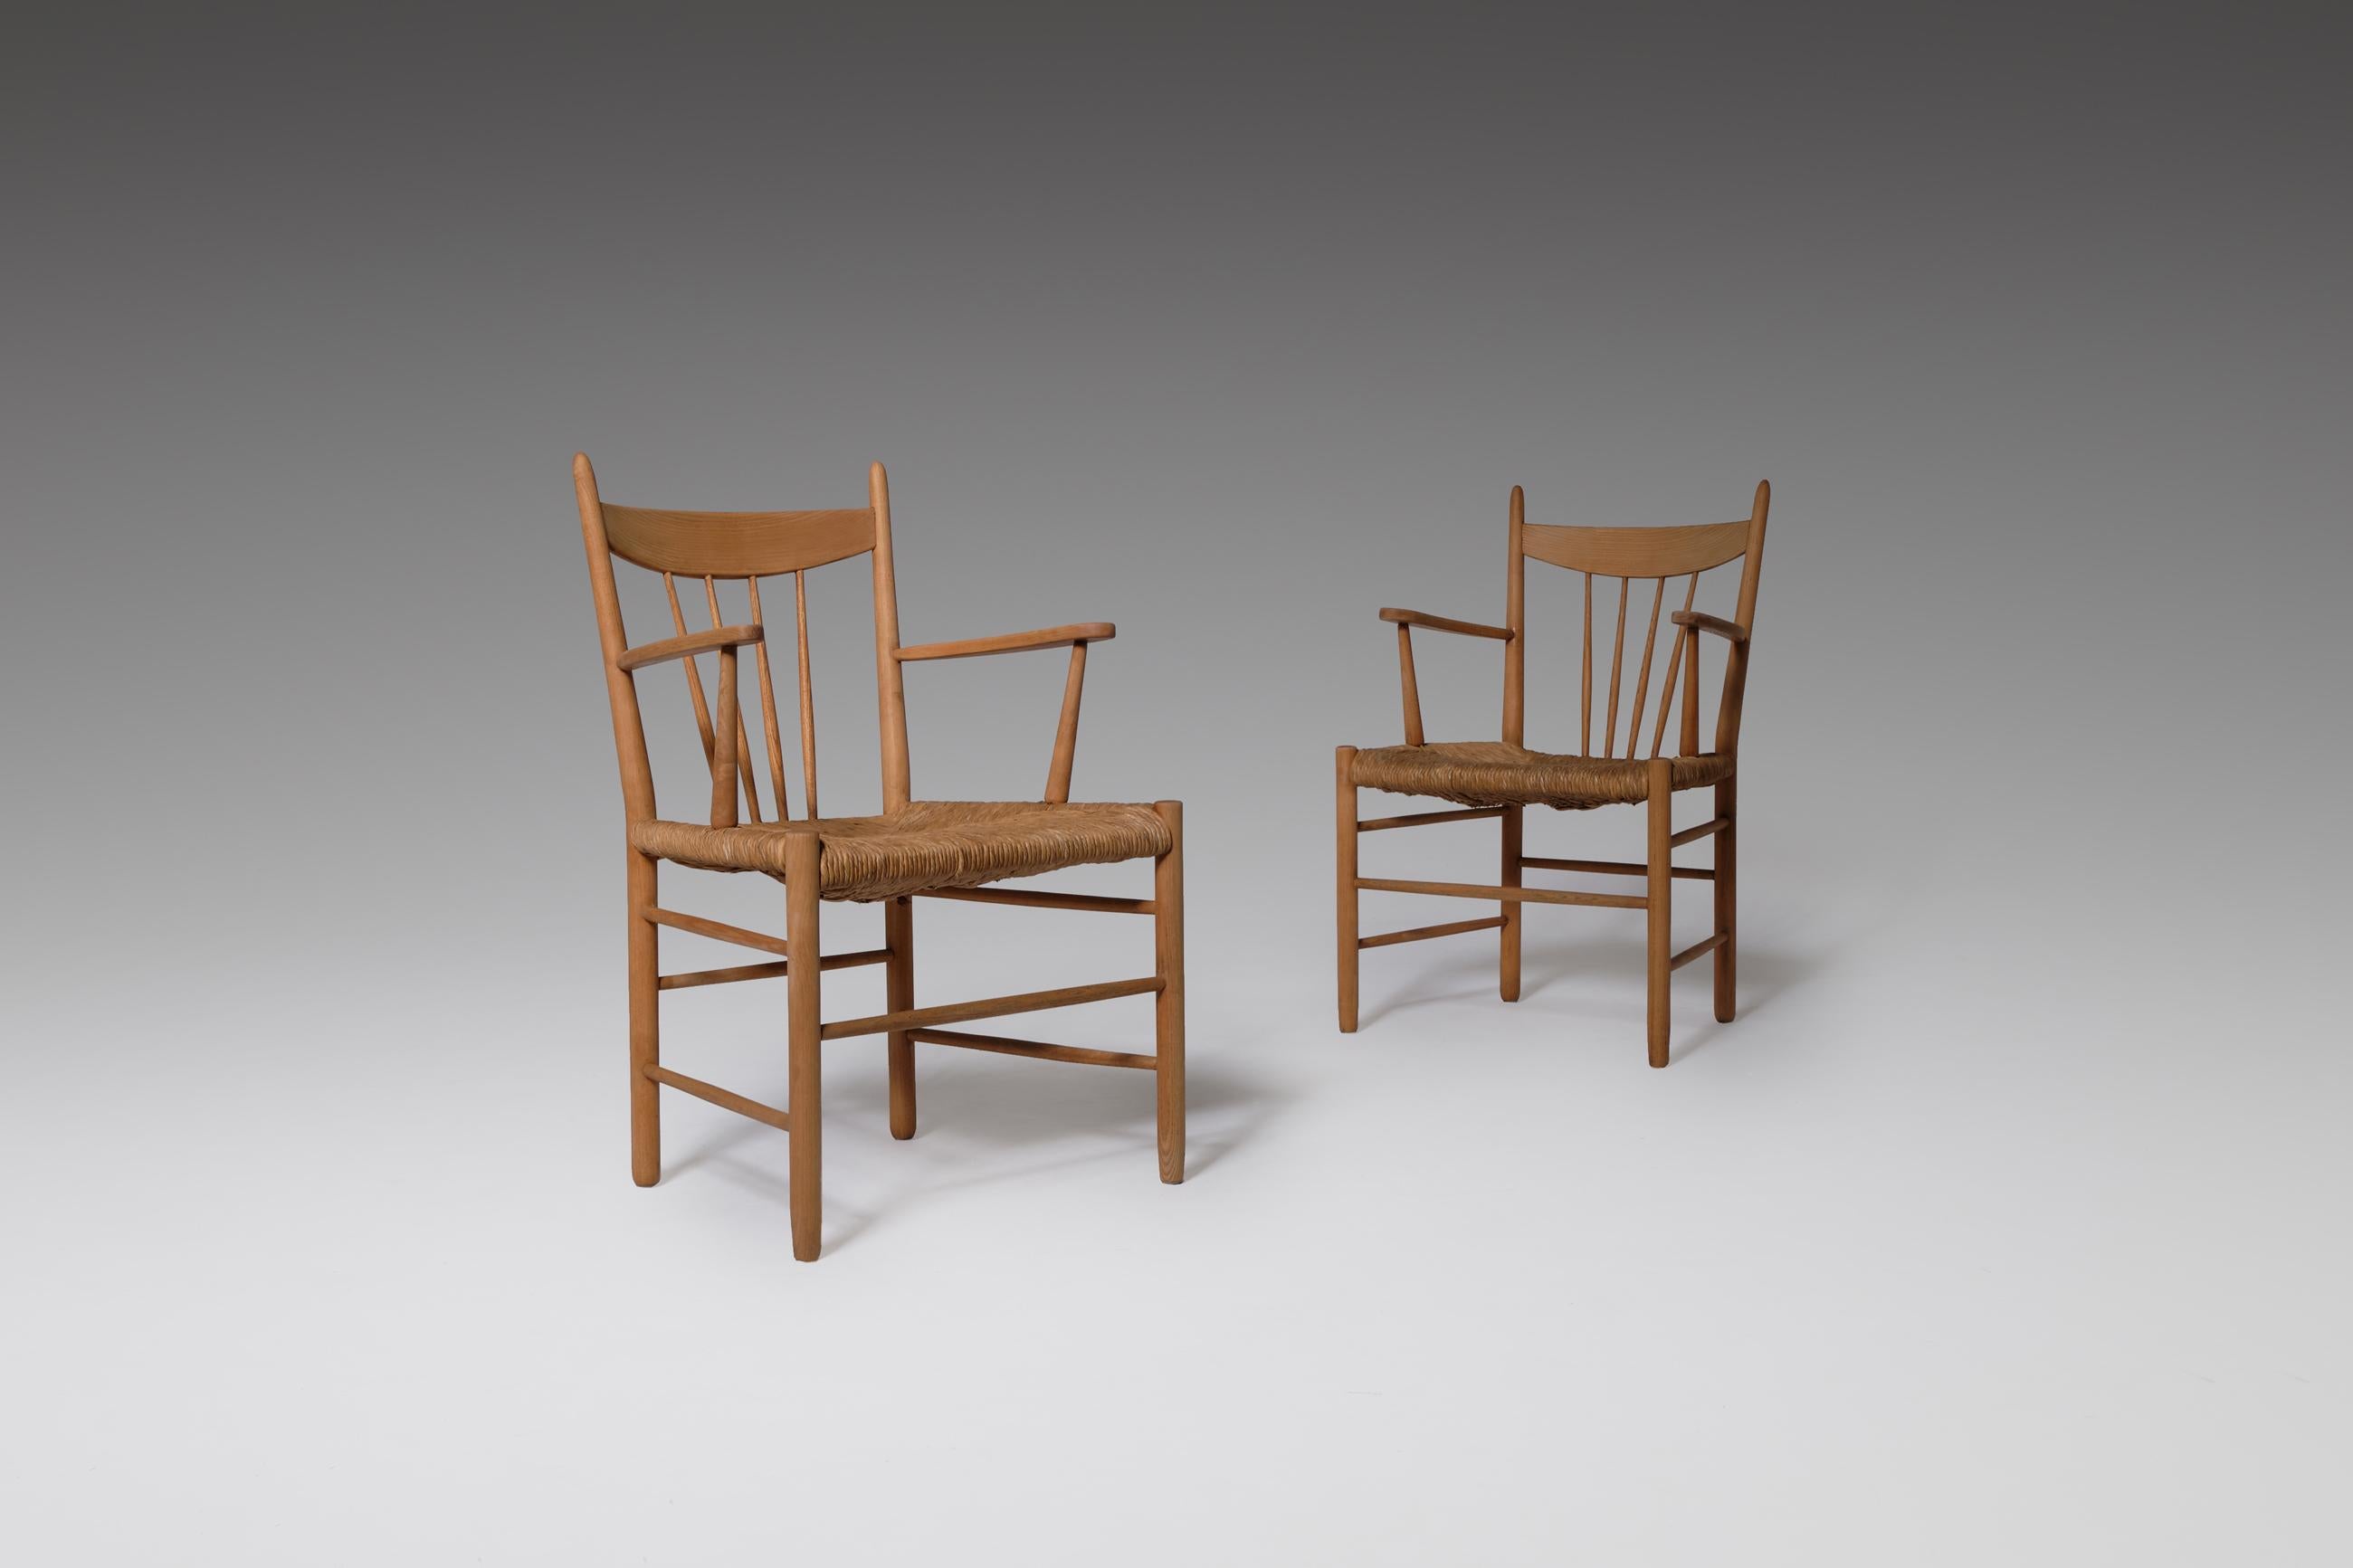 Scandinavian Modern side chairs in solid oak and rush, Denmark, 1950s. A modest and traditional design in solid oak and elegantly woven rush seat. The materials provide a nice rustic yet modern appearance. In original condition with beautiful